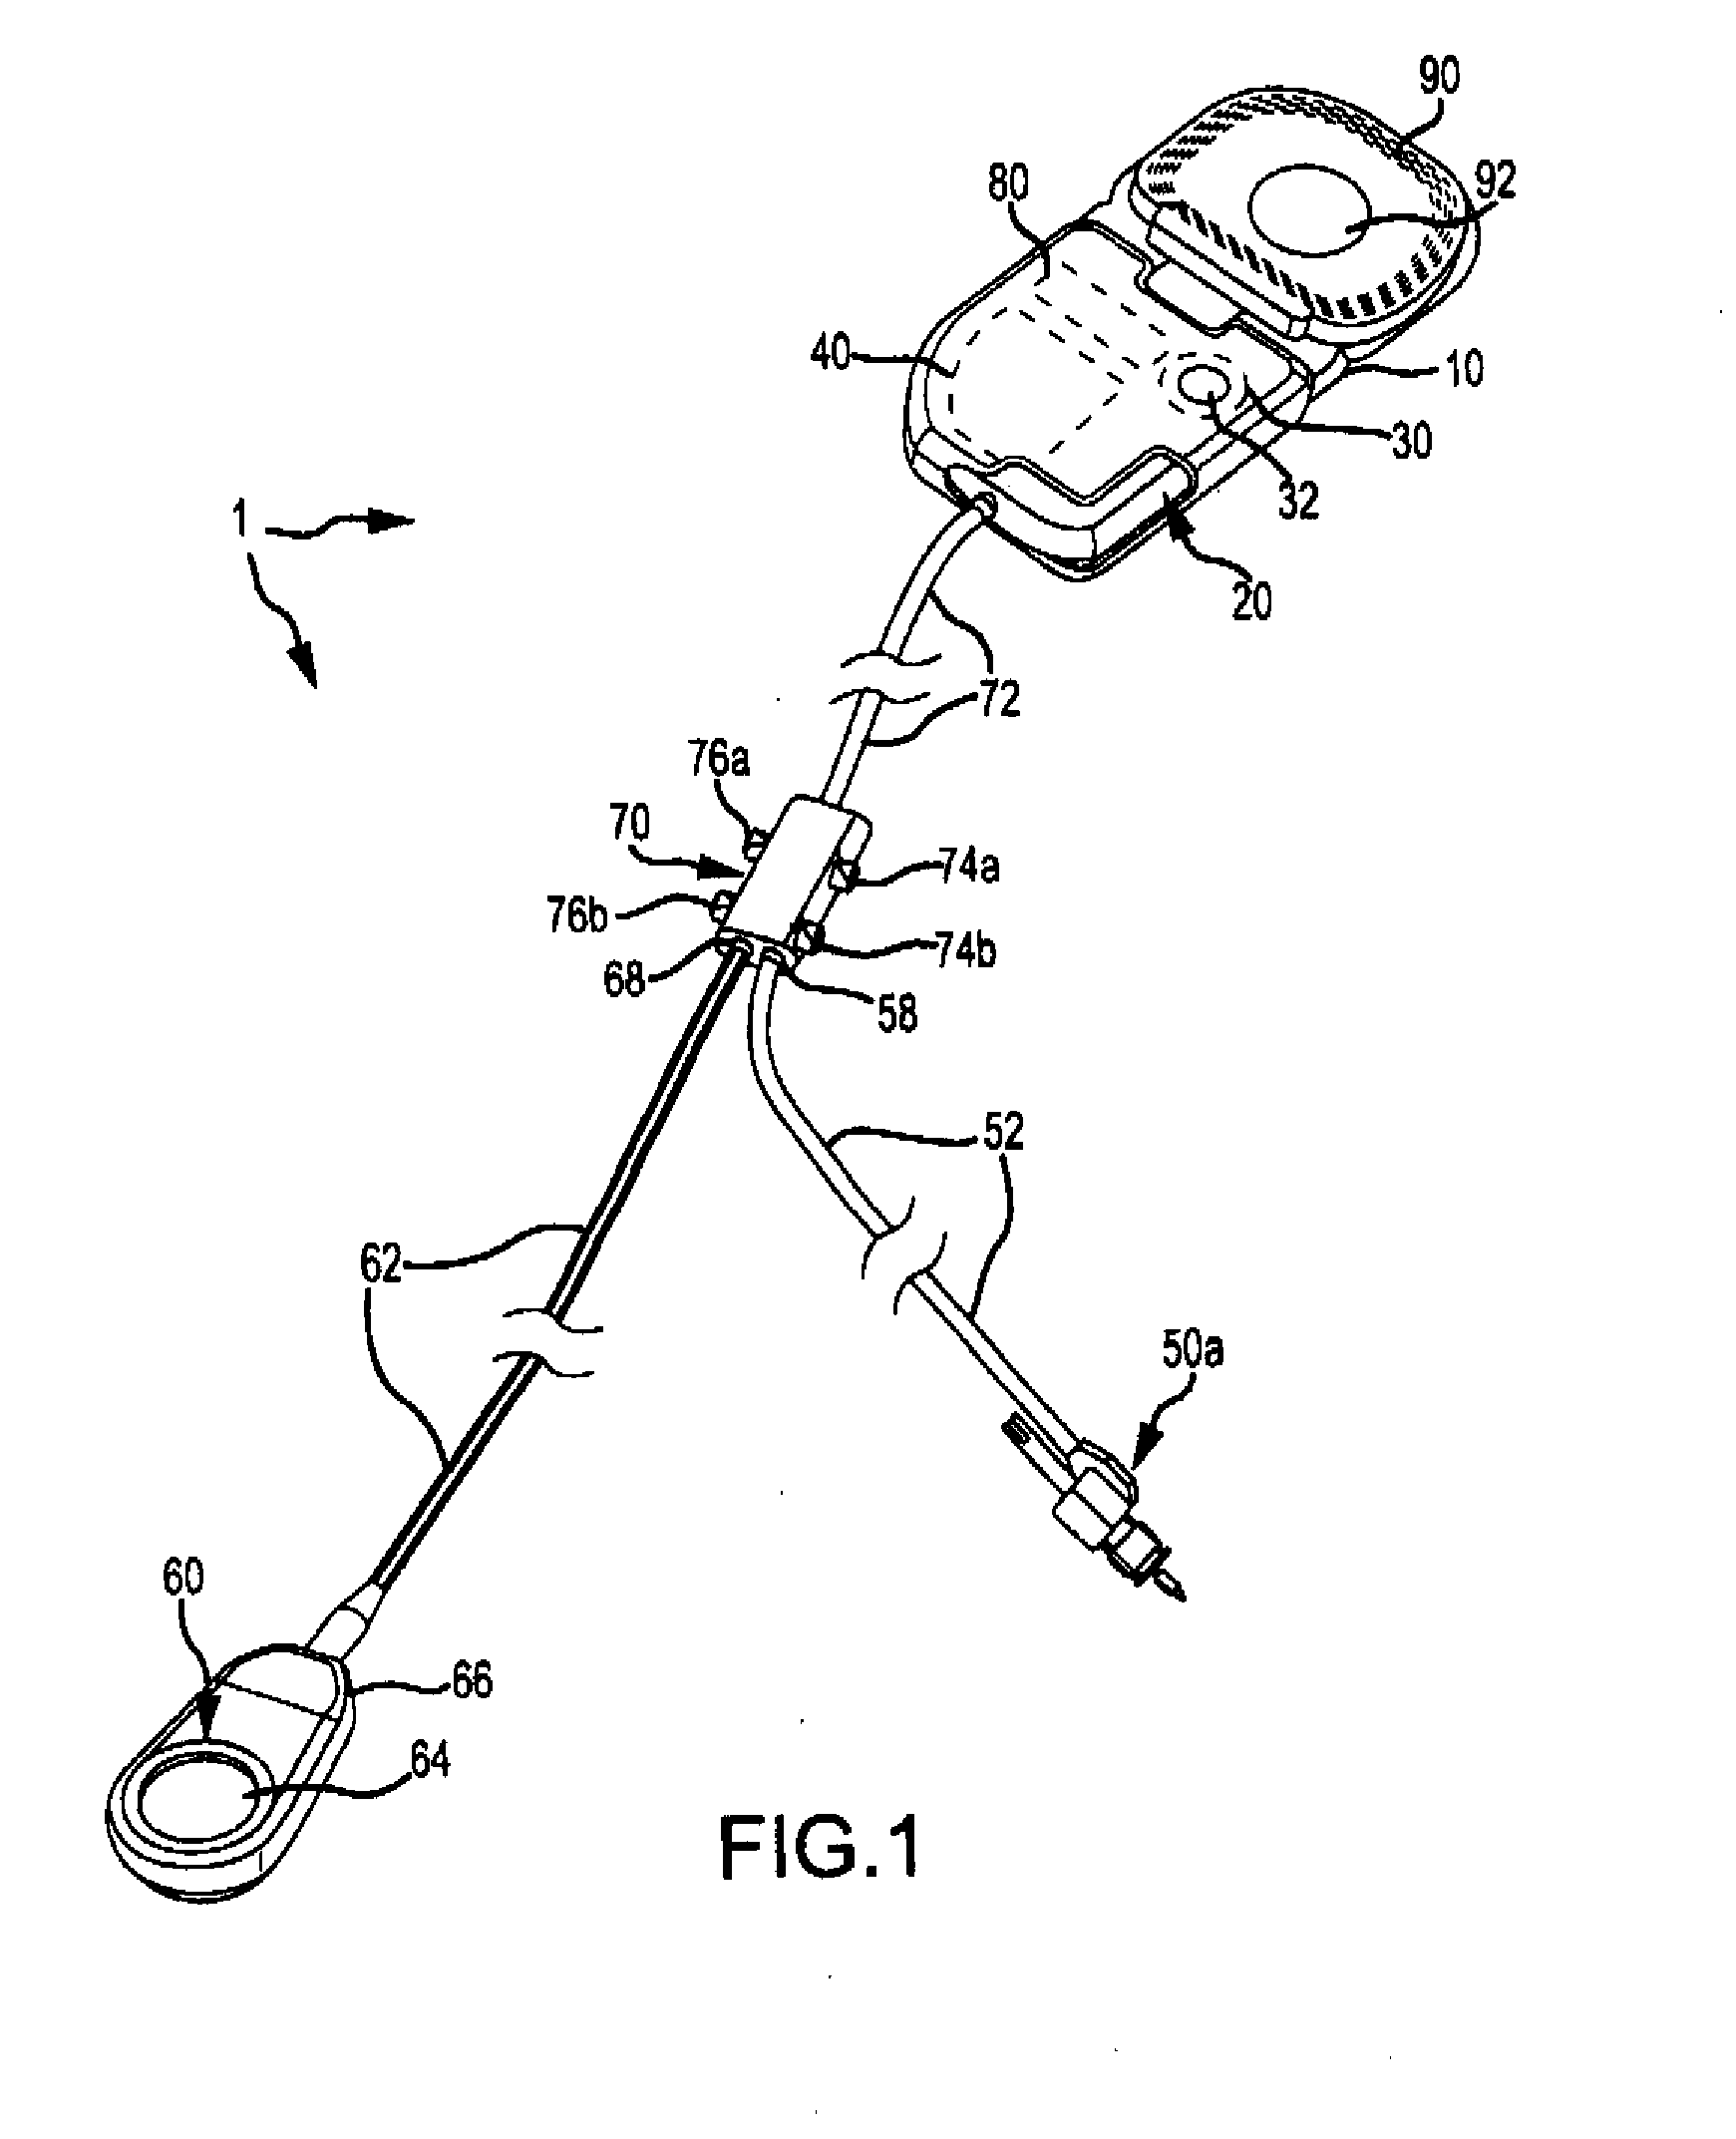 Implantable auditory stimulation system and method with offset implanted microphones